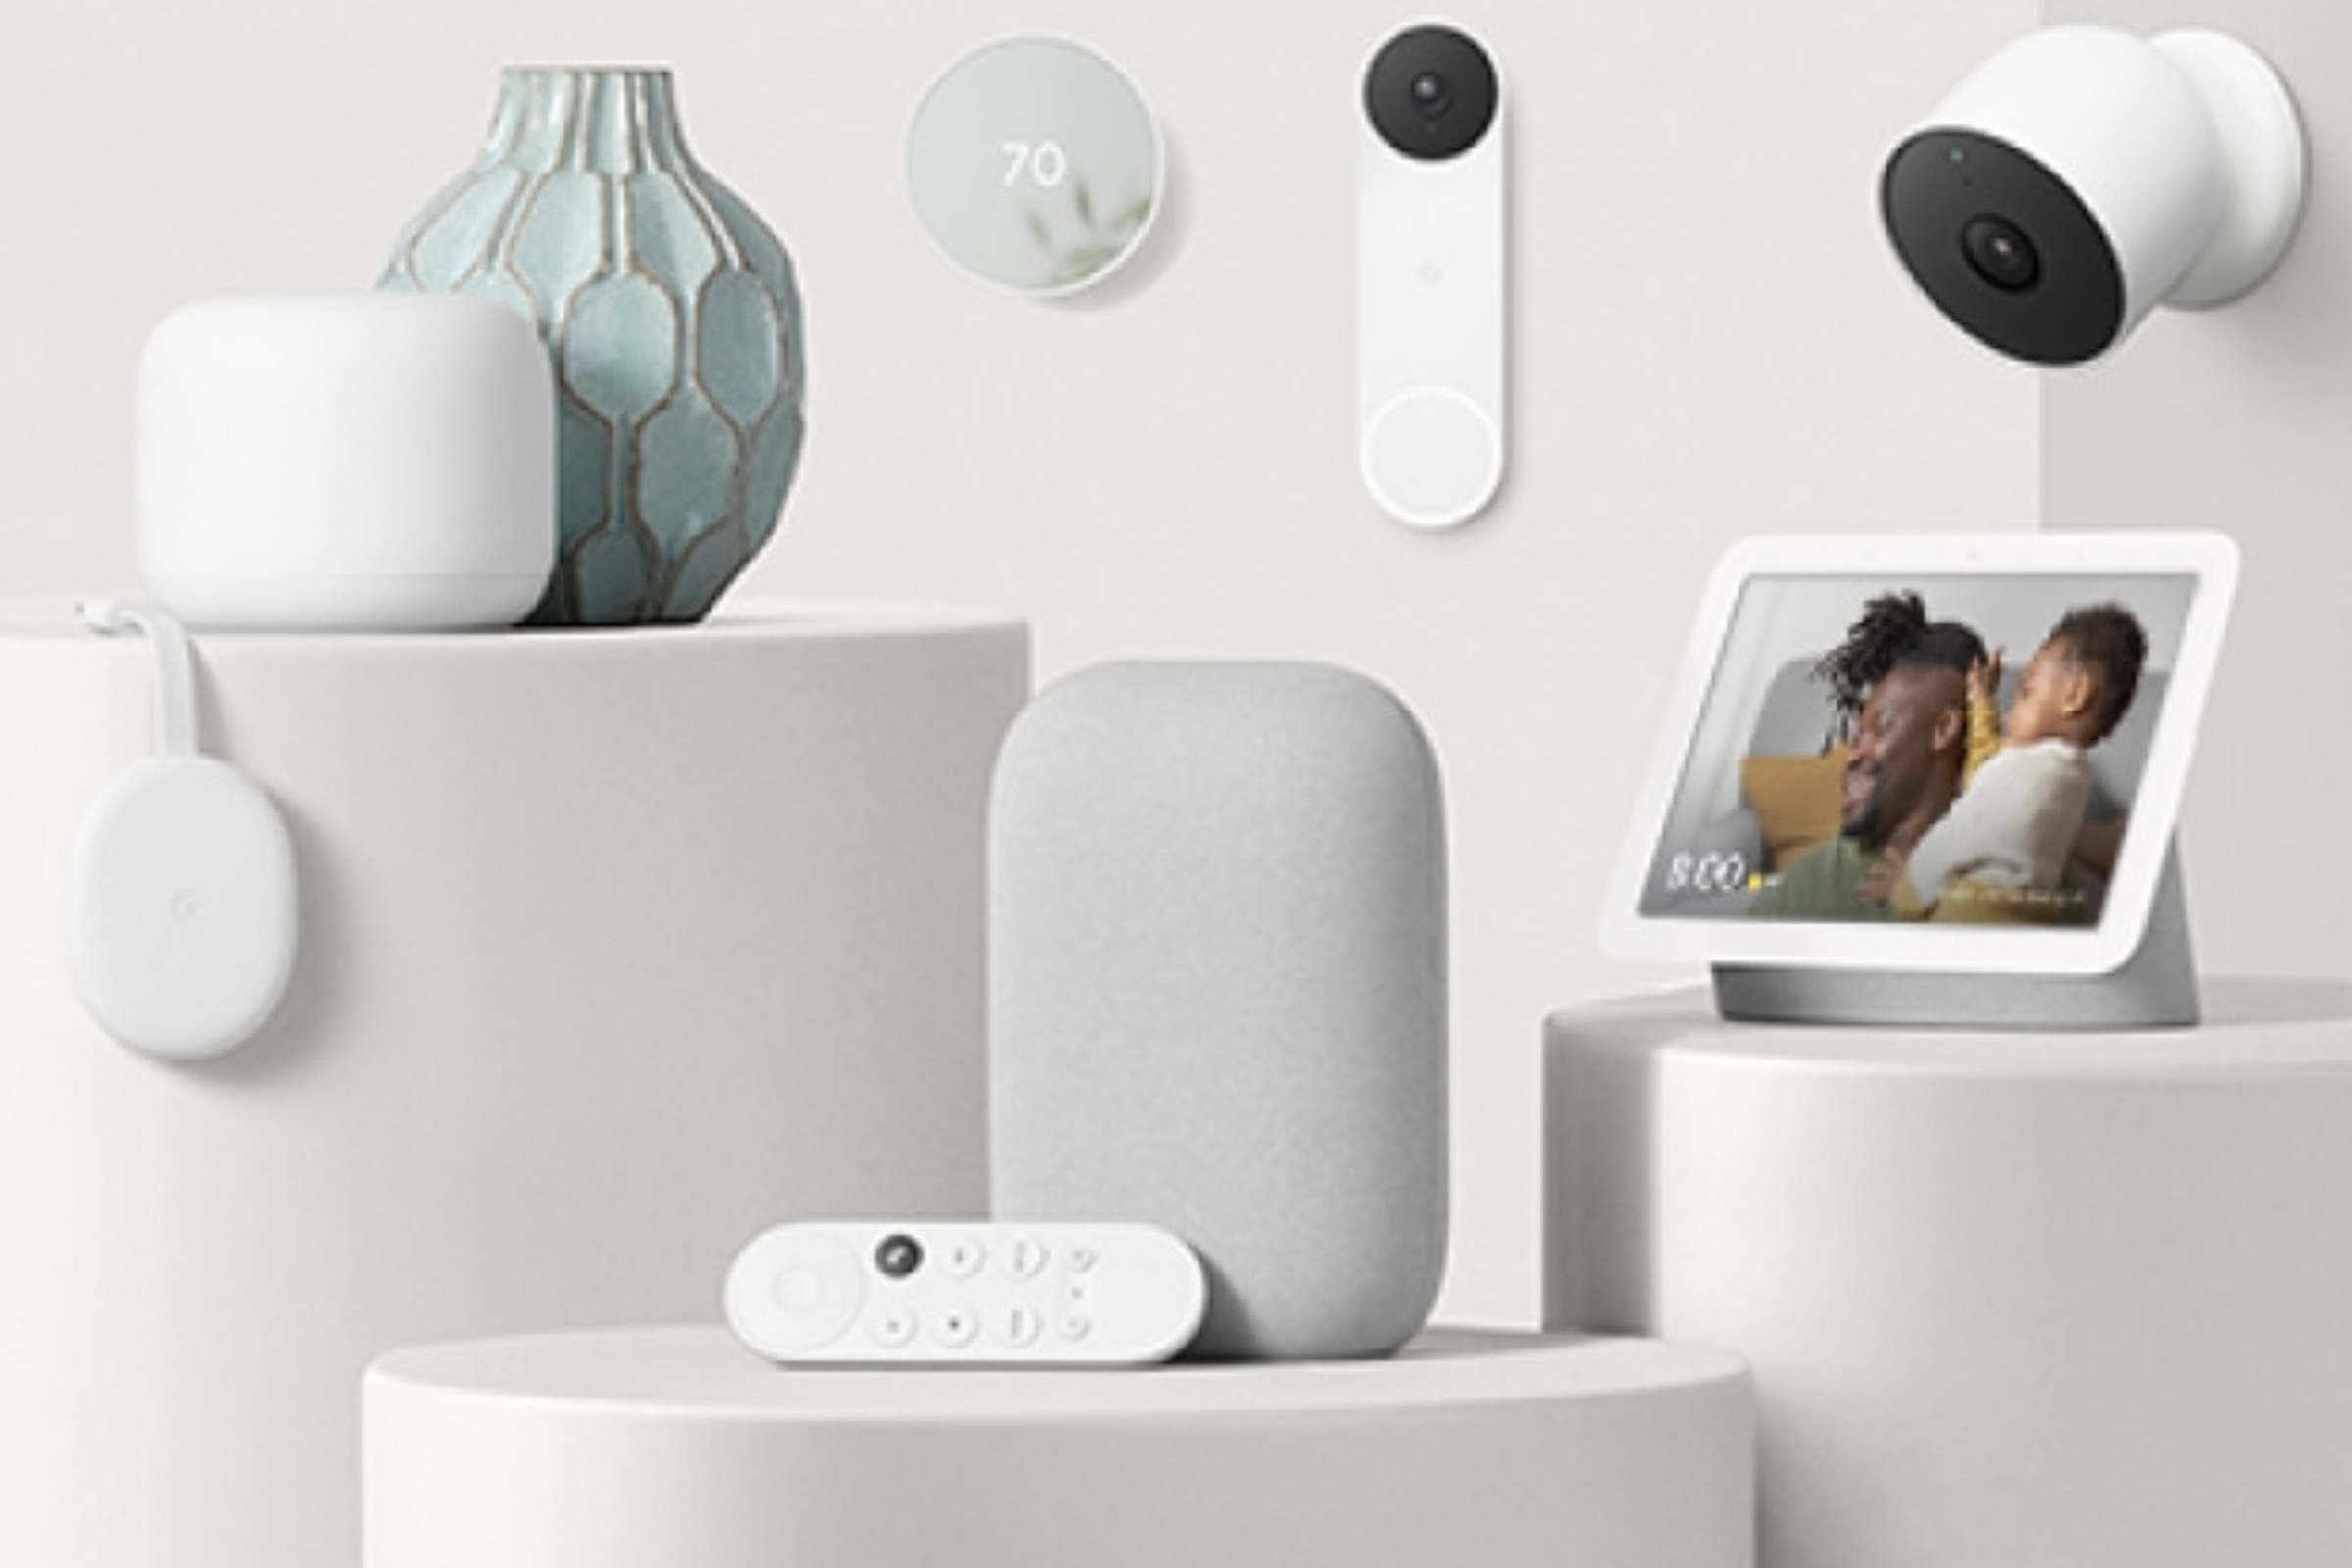 An image from Google’s online store that shows off a new Nest Cam and Nest Doorbell.